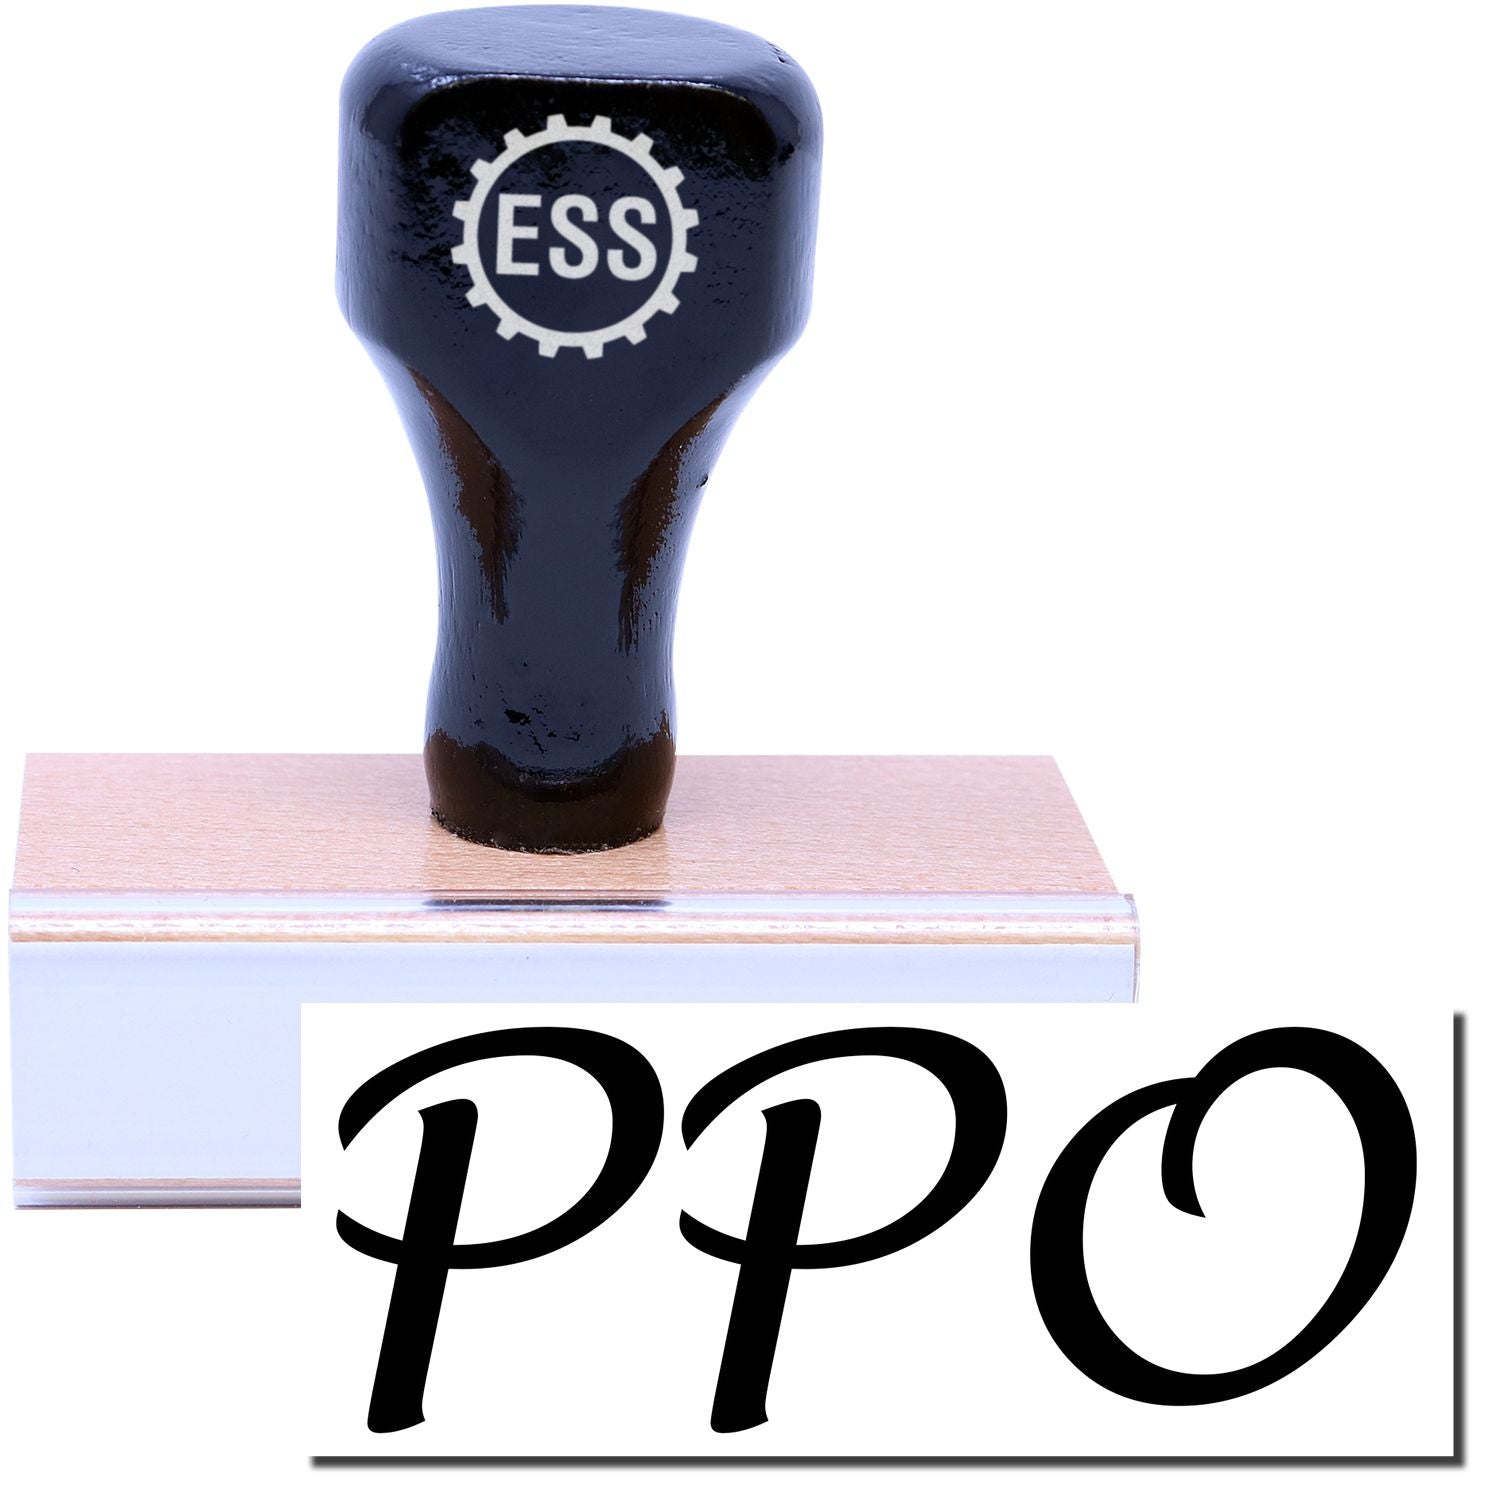 A stock office rubber stamp with a stamped image showing how the text "PPO" in a large font is displayed after stamping.